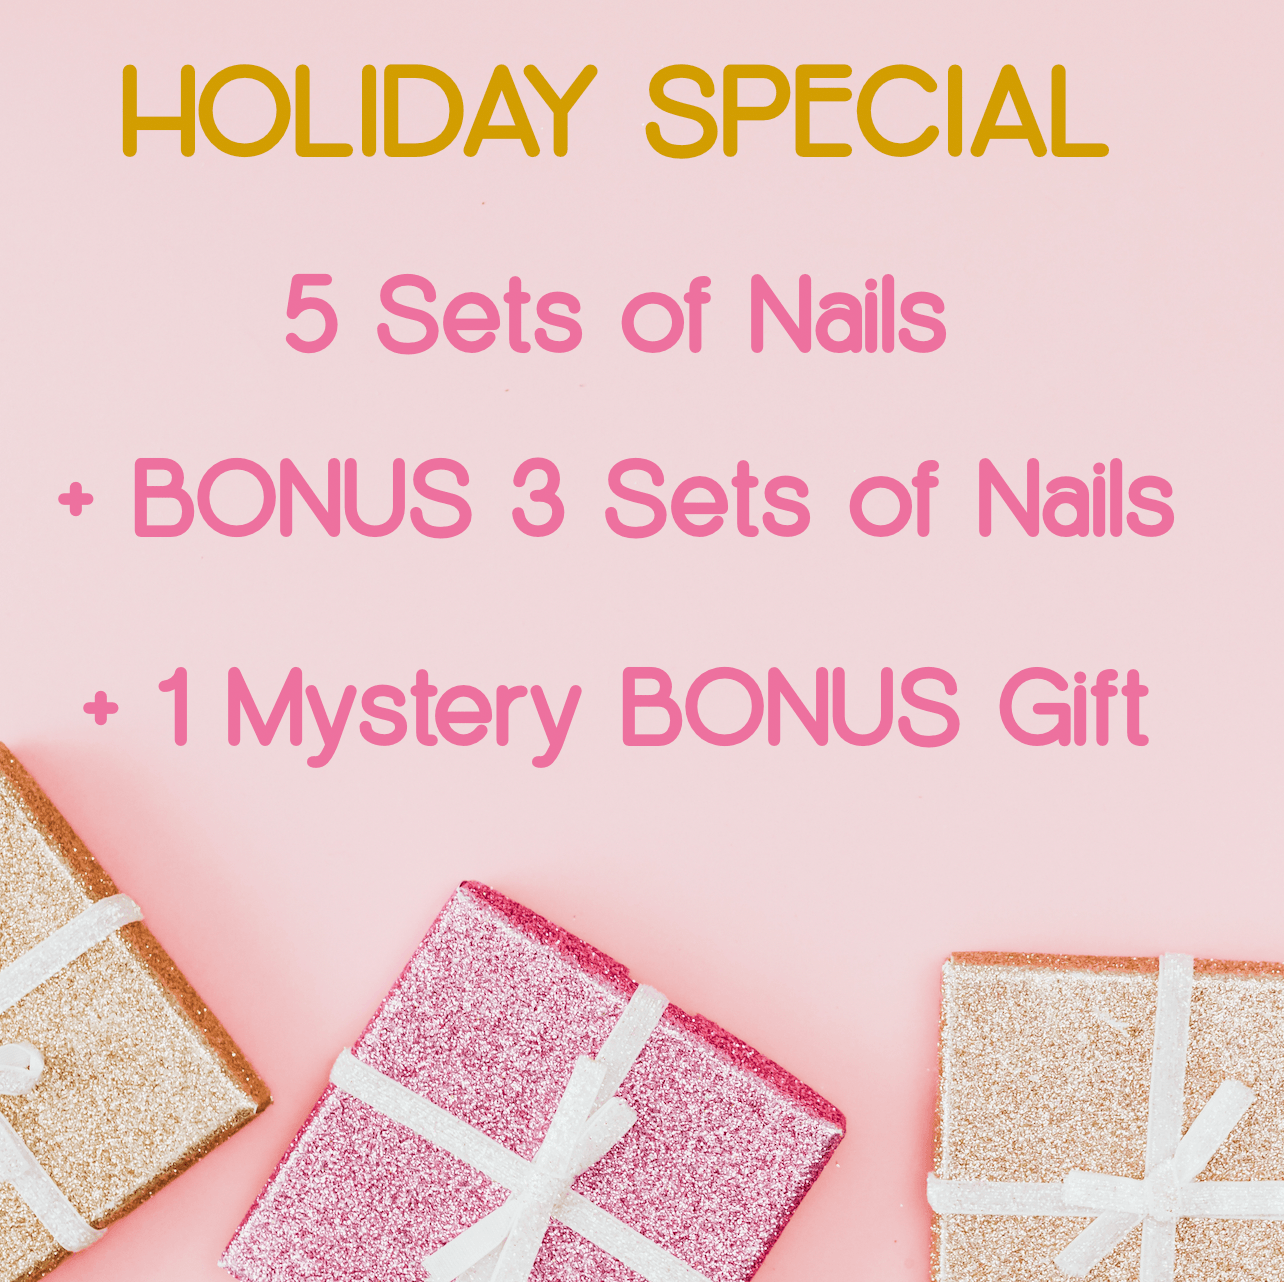 [LUCKY BALLS] 1 Big Scoop of Our Press-On Nails (5 Sets + 3 Bonus Gift Sets + 1 Mystery Bonus Gift) | HOLIDAY SPECIAL!! - Belle Rose Nails